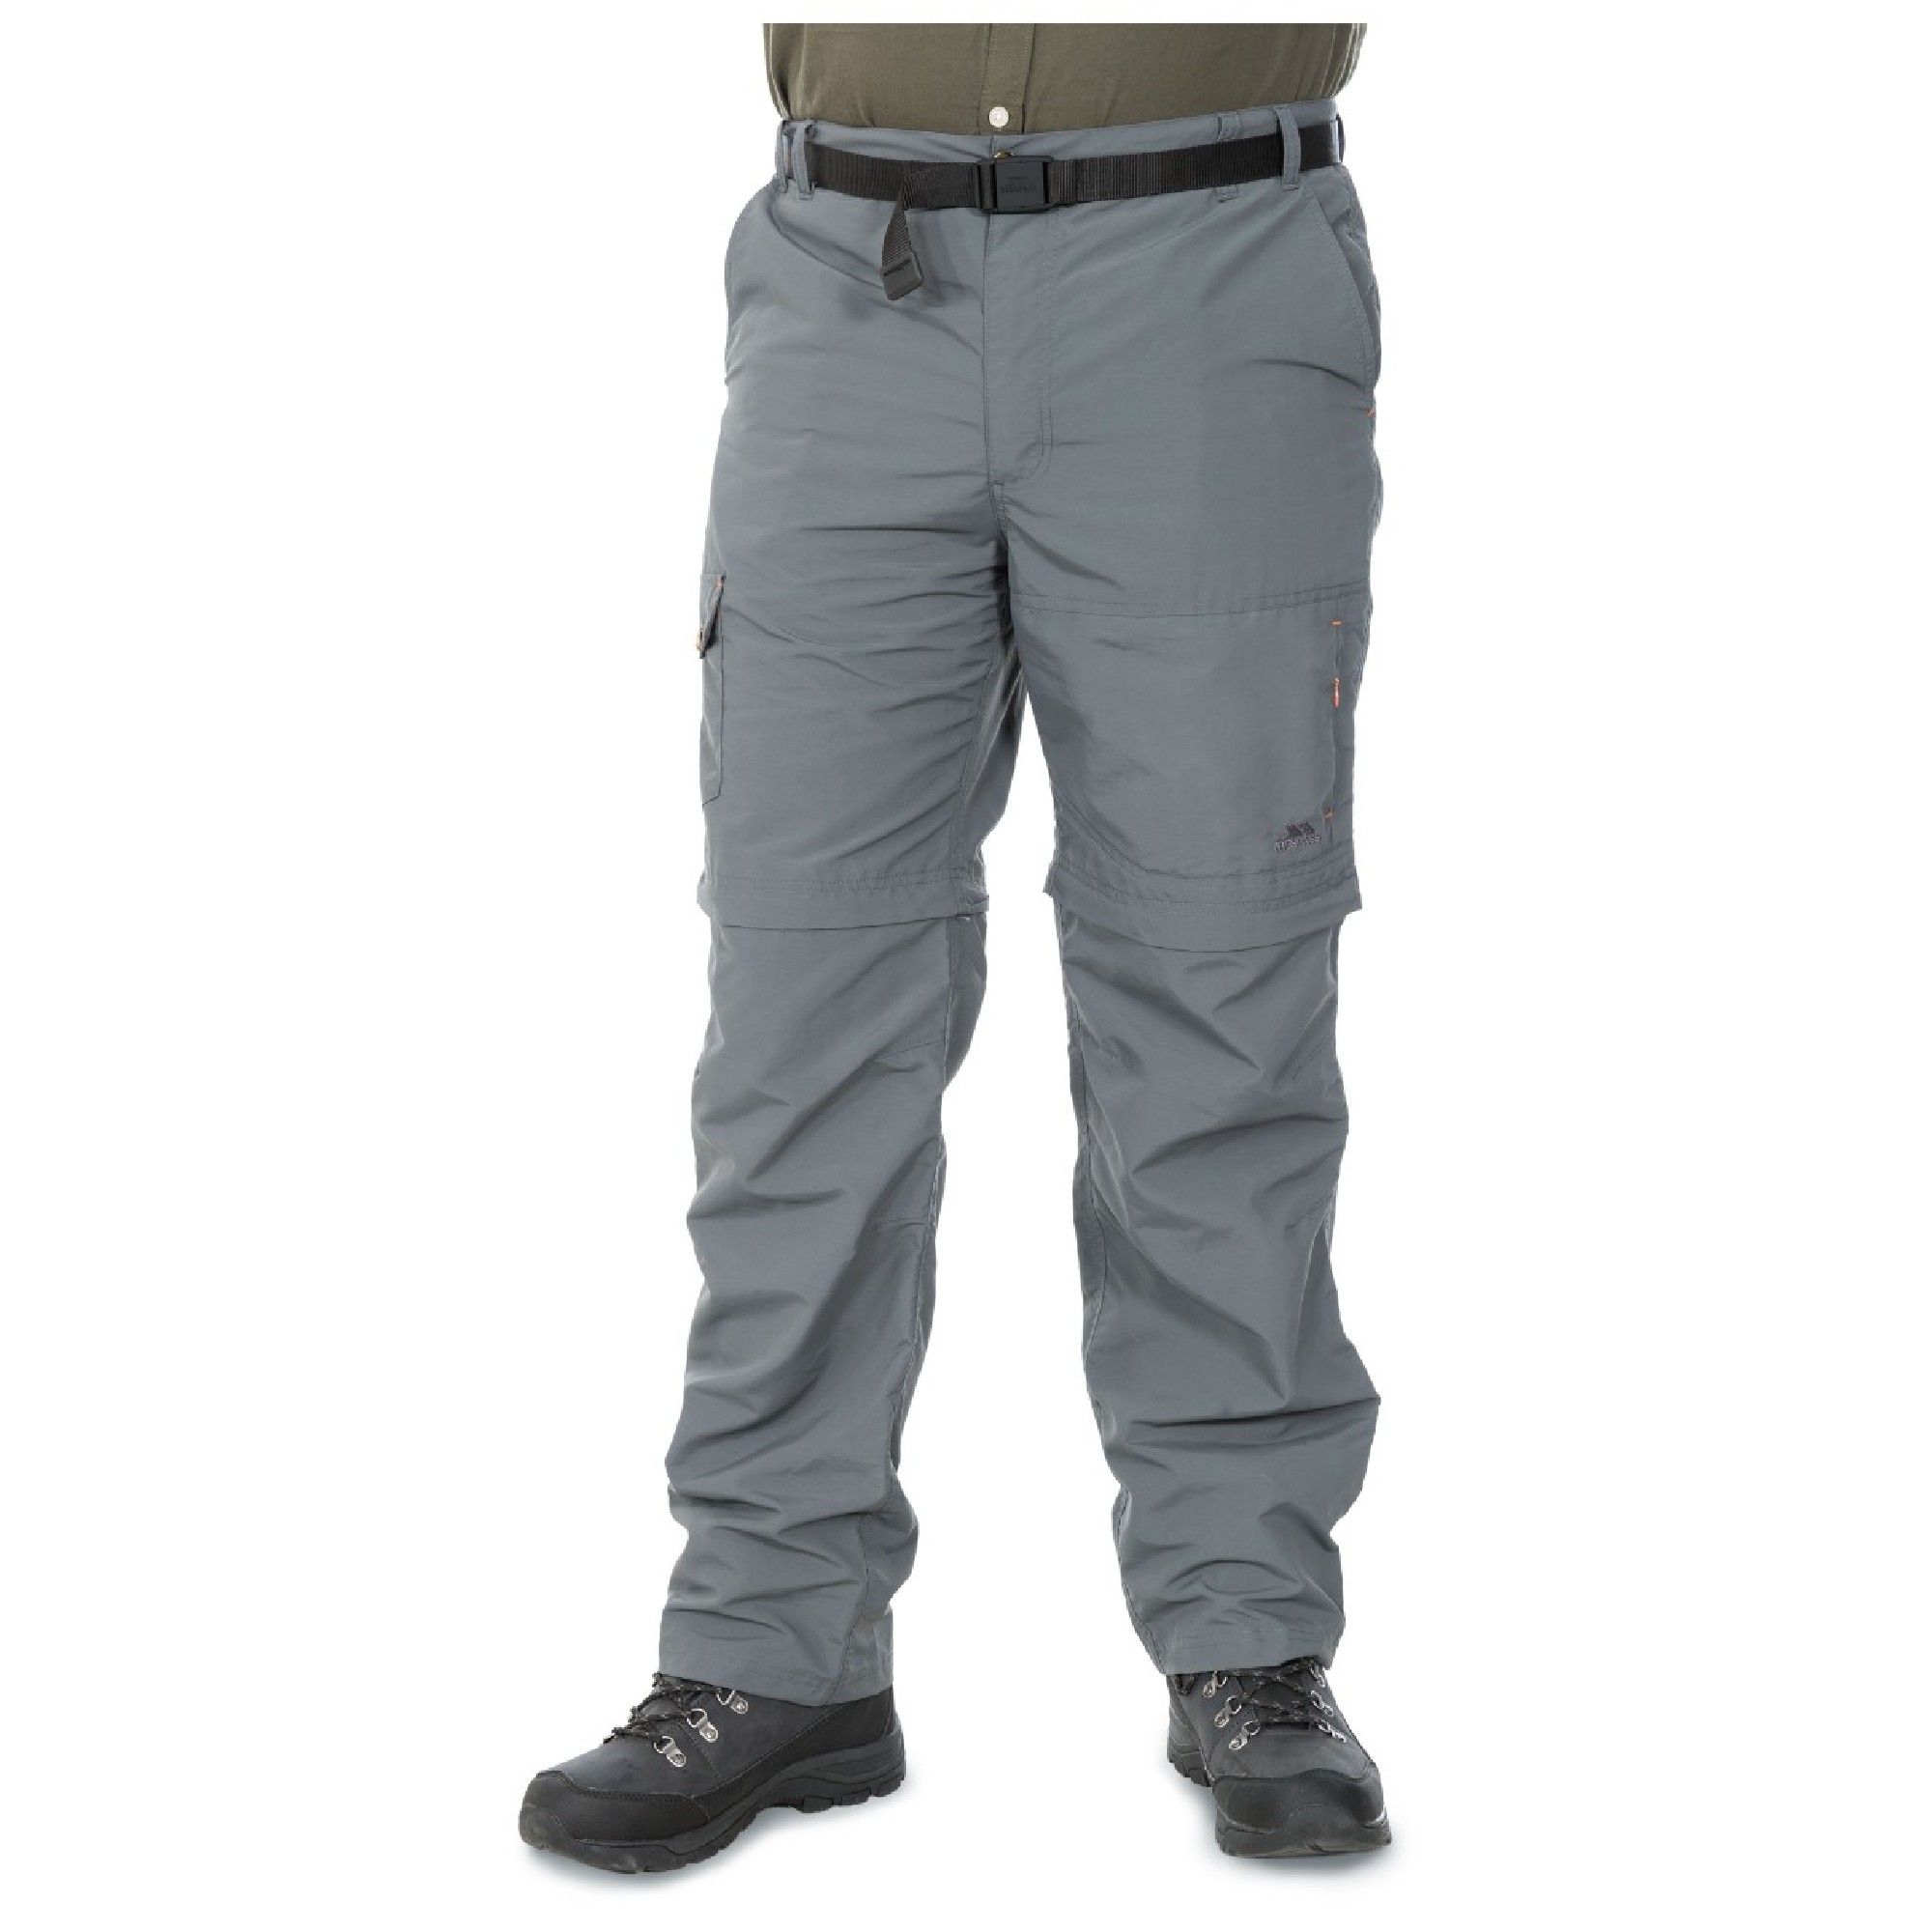 Flat waist with elasticated back panel. Adjustable belt. Zip off legs. Fly front opening. 6 pockets. Quick dry. UV 40+. Mosquito repellent finish. HHL technology. 100% Polyamide. Trespass Mens Waist Sizing (approx): S - 32in/81cm, M - 34in/86cm, L - 36in/91.5cm, XL - 38in/96.5cm, XXL - 40in/101.5cm, 3XL - 42in/106.5cm.